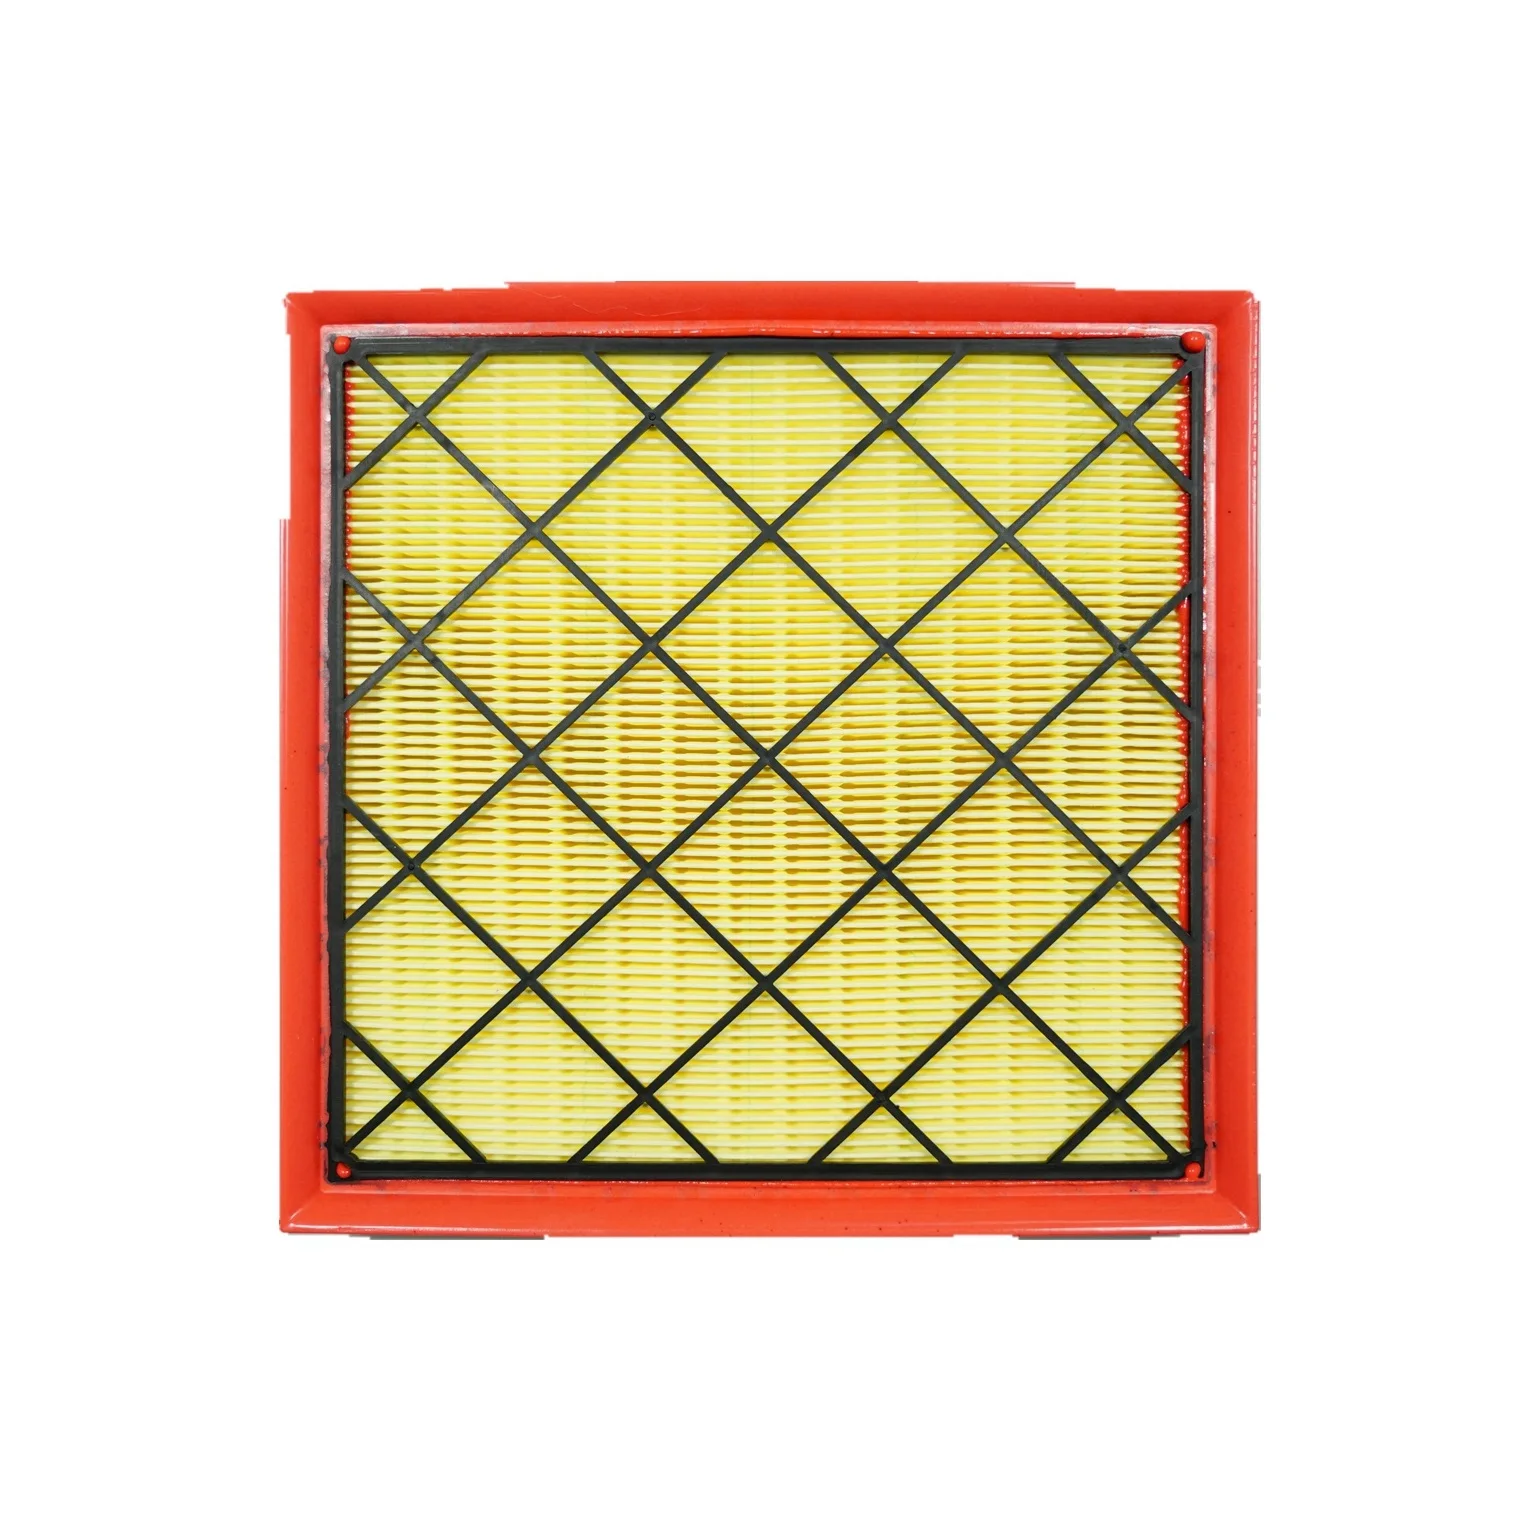 

Air Filter For Buick Excelle GT XT 1.6T 2010-2015 Chevrolet Cruze(J300) 2.0CDI 2009-/ORLANDO (J309) 2.0 2011- Car Fiilter 834126